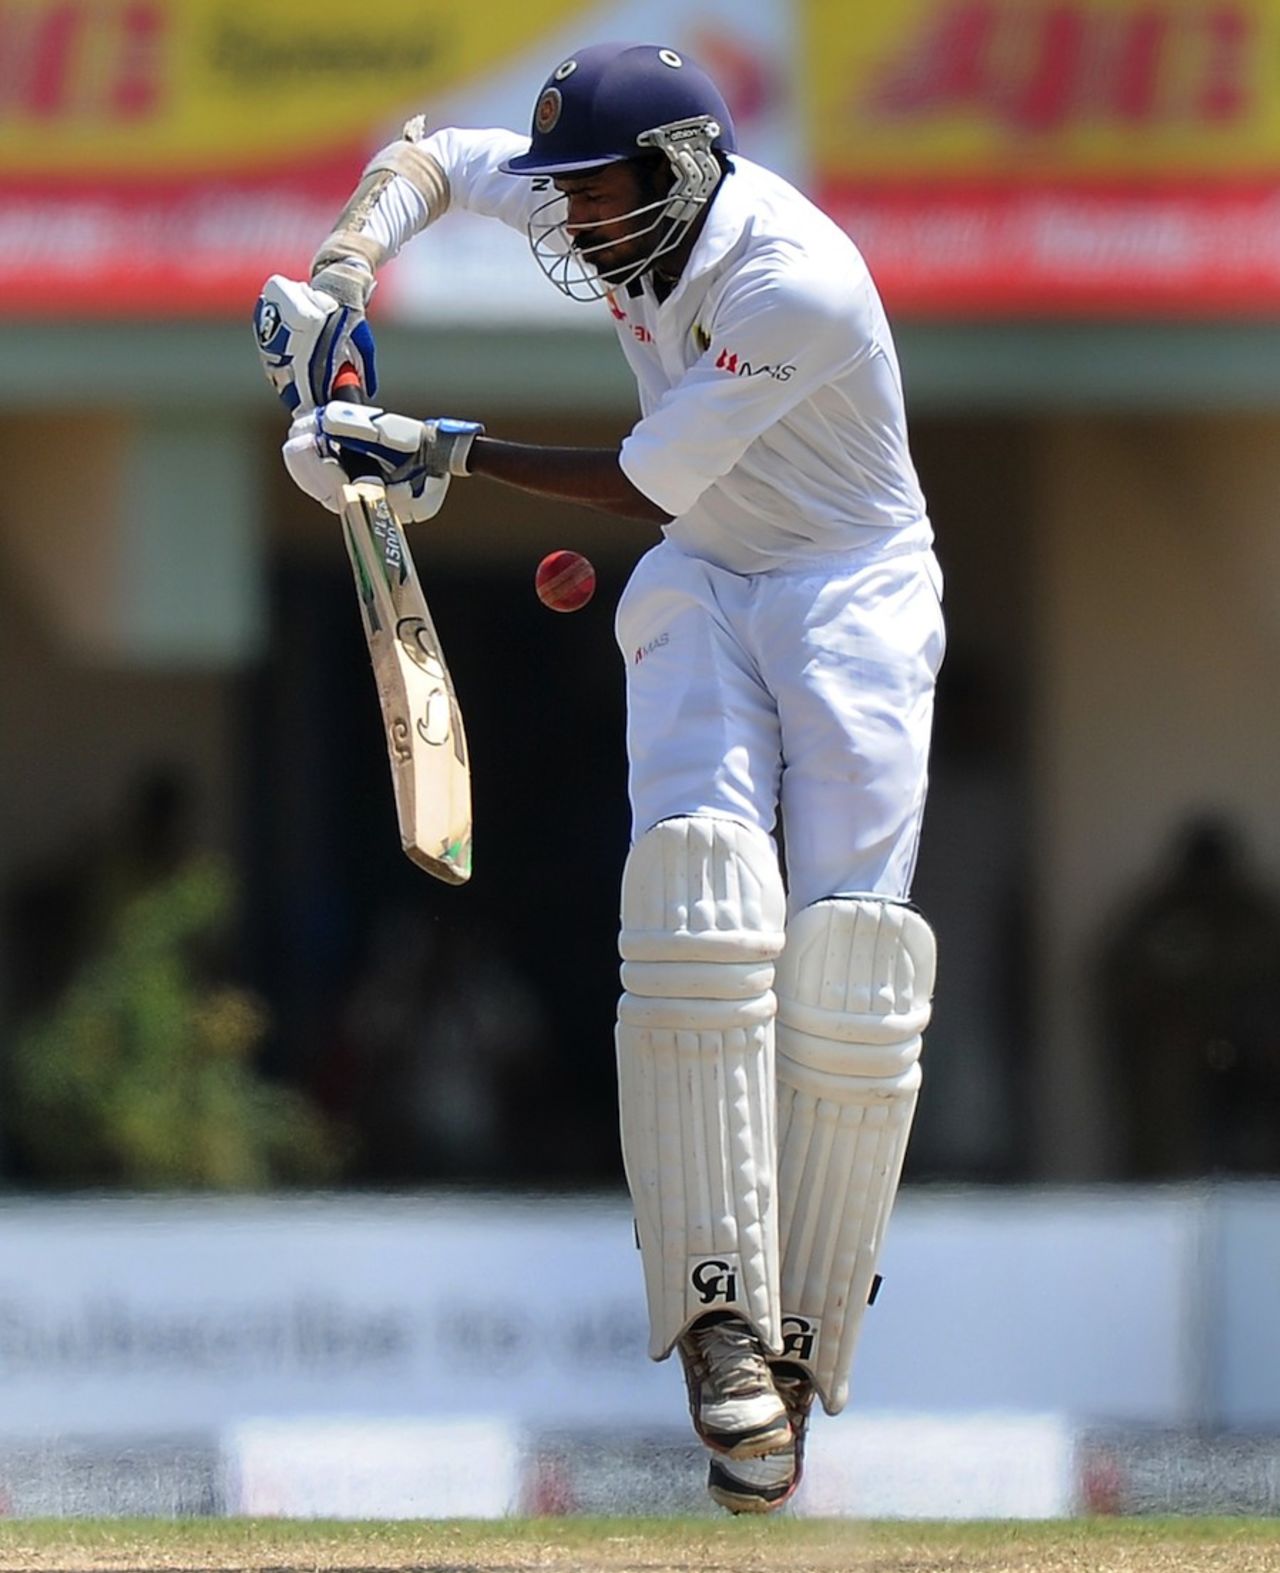 Upul Tharanga gets off his toes to play a ball, Sri Lanka v South Africa, 1st Test, Galle, 3rd day, July 18, 2014